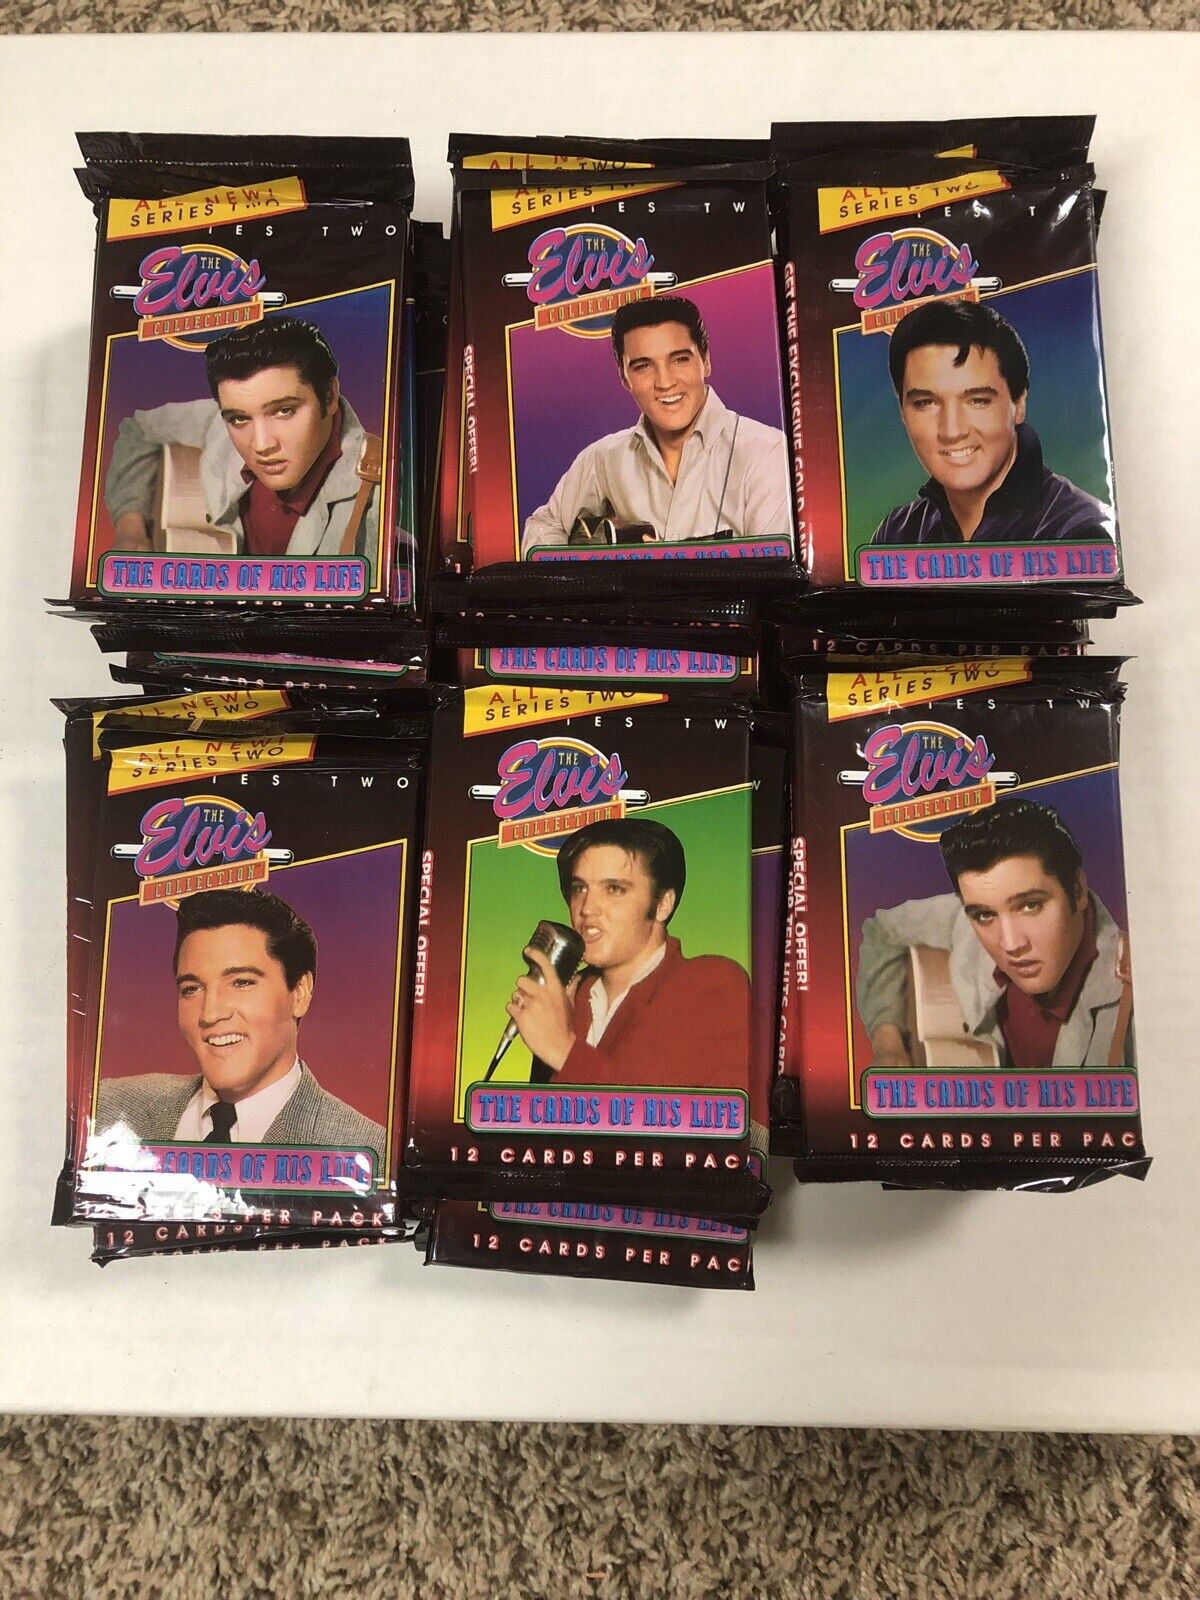 (43) 1992 Elvis Collection The Cards of His Life Series 2 Two SEALED PACKS